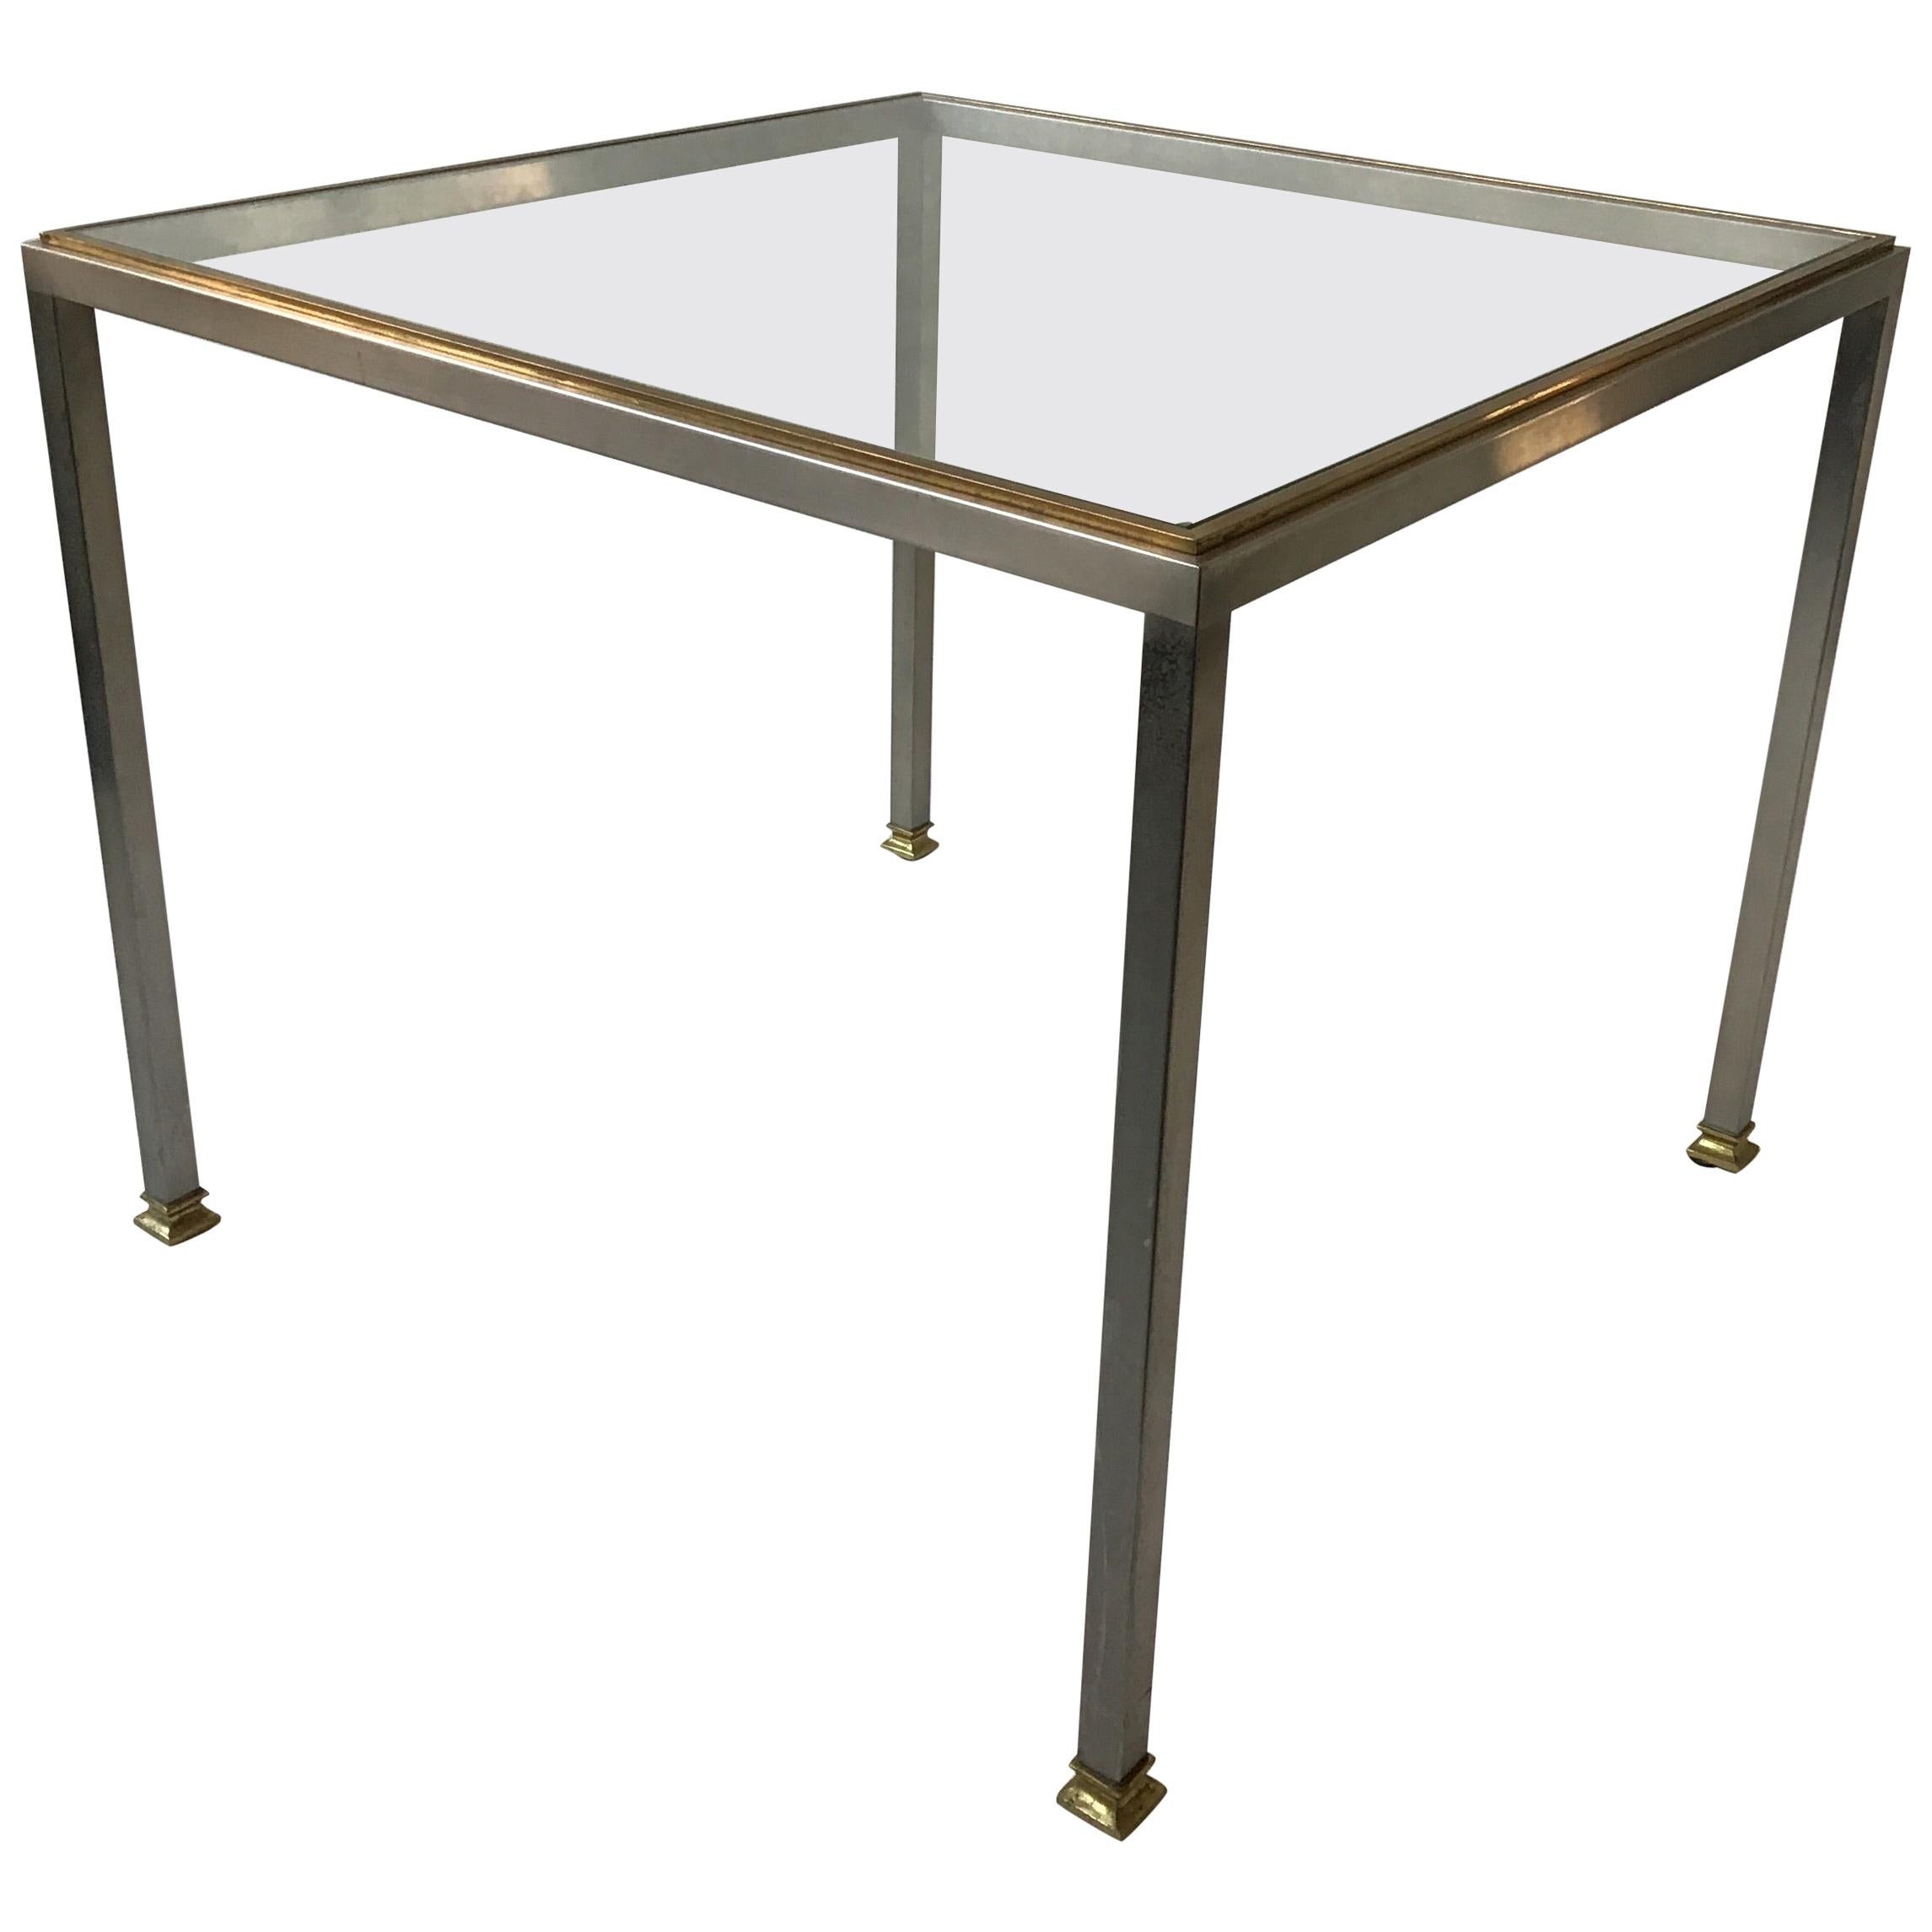 1980s Italian Steel and Brass Side Table